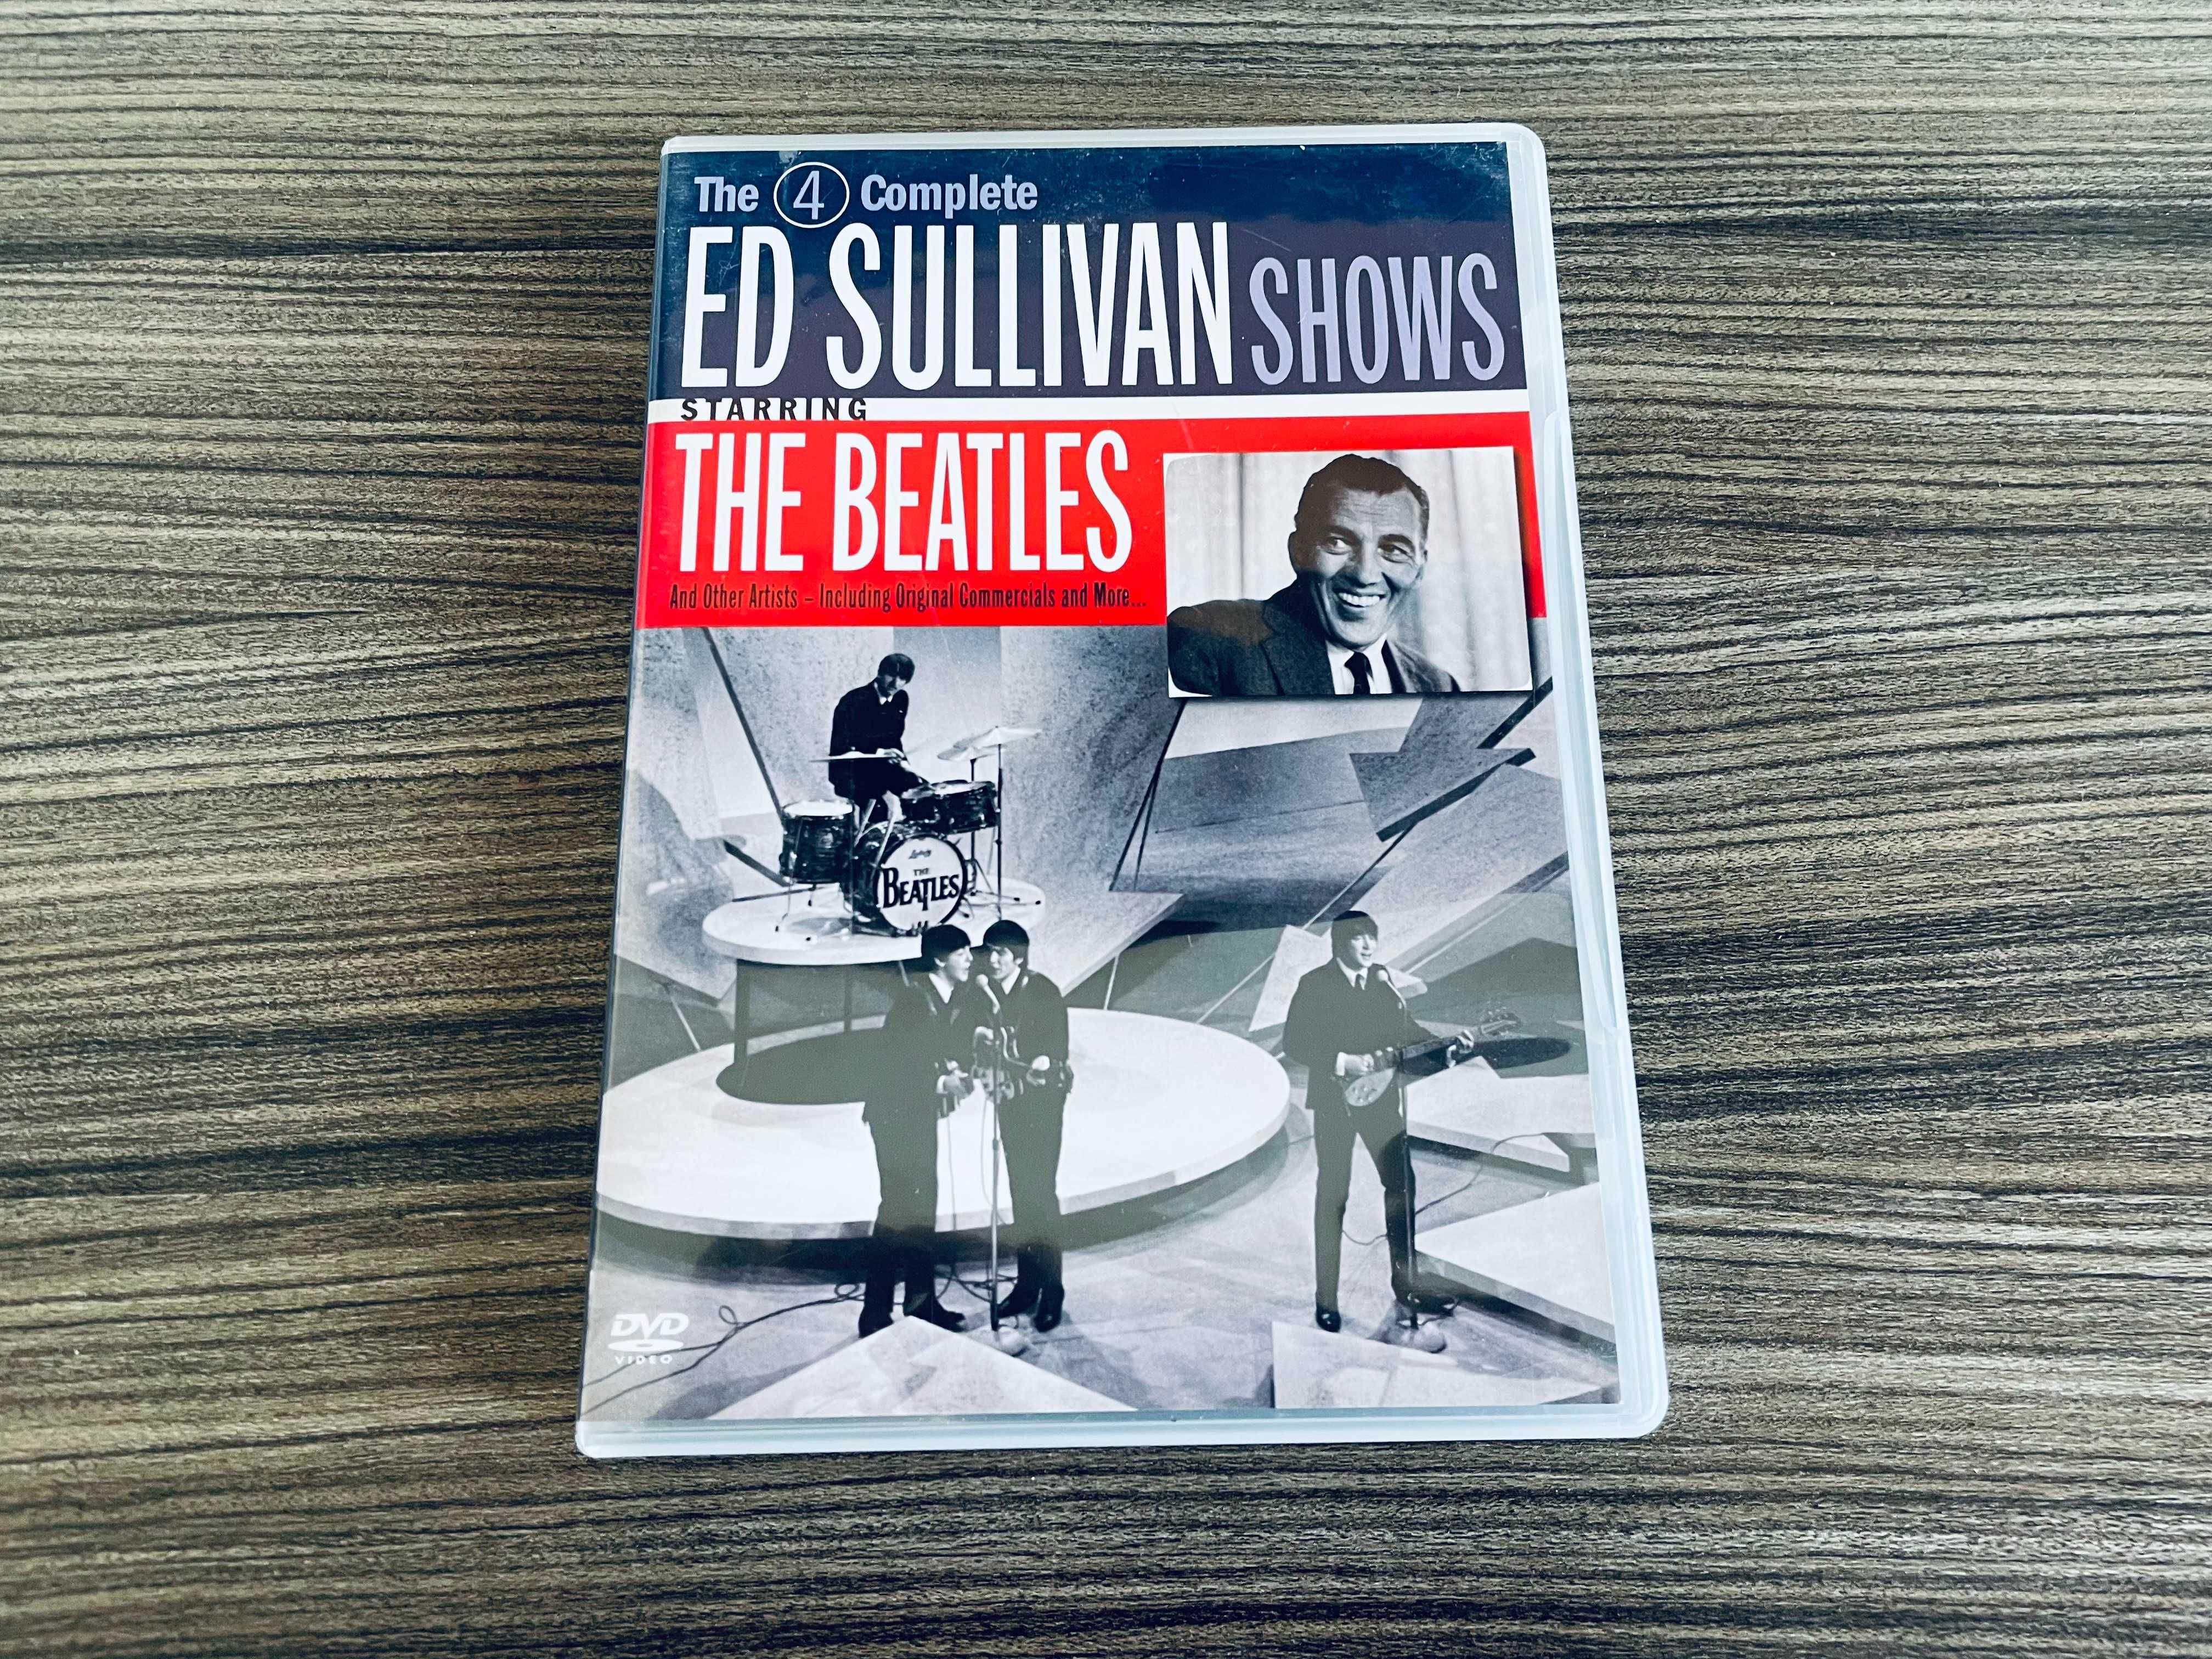 The Beatles (2xDVD, The 4 Complete Ed Sullivan Shows)